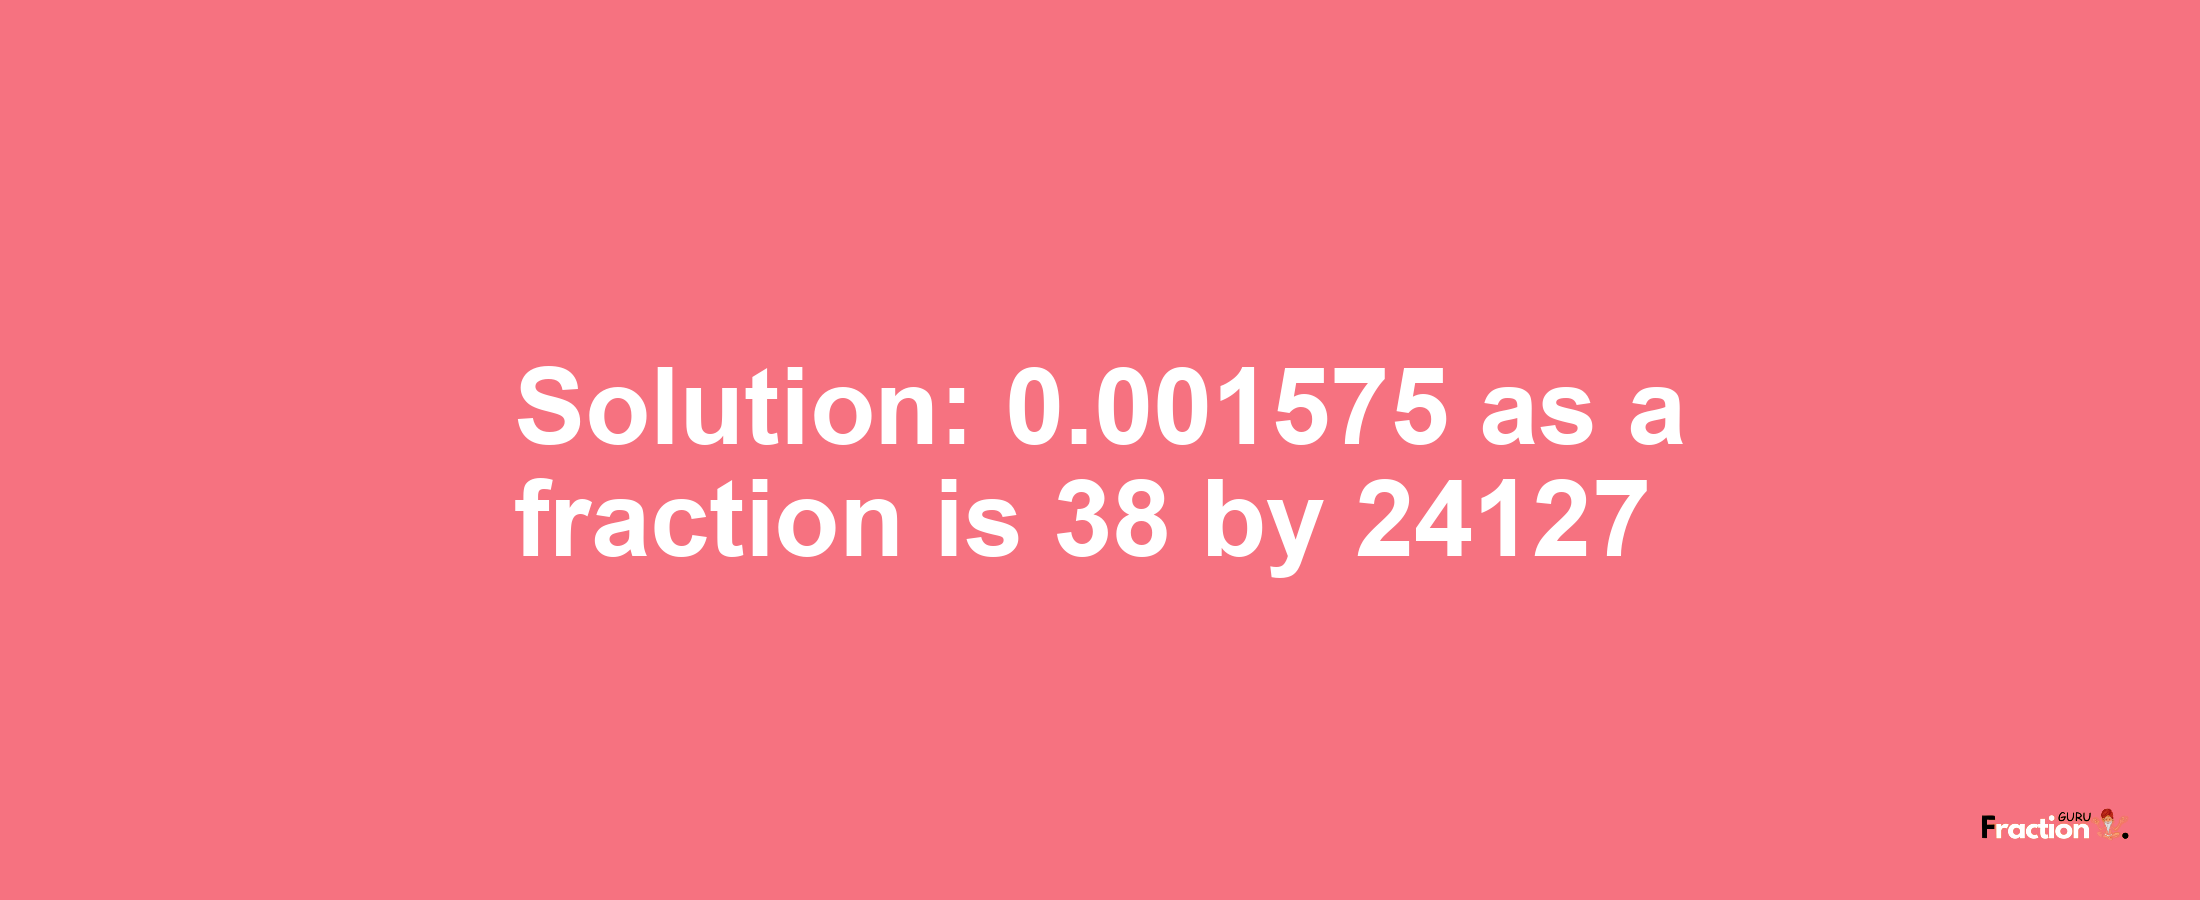 Solution:0.001575 as a fraction is 38/24127